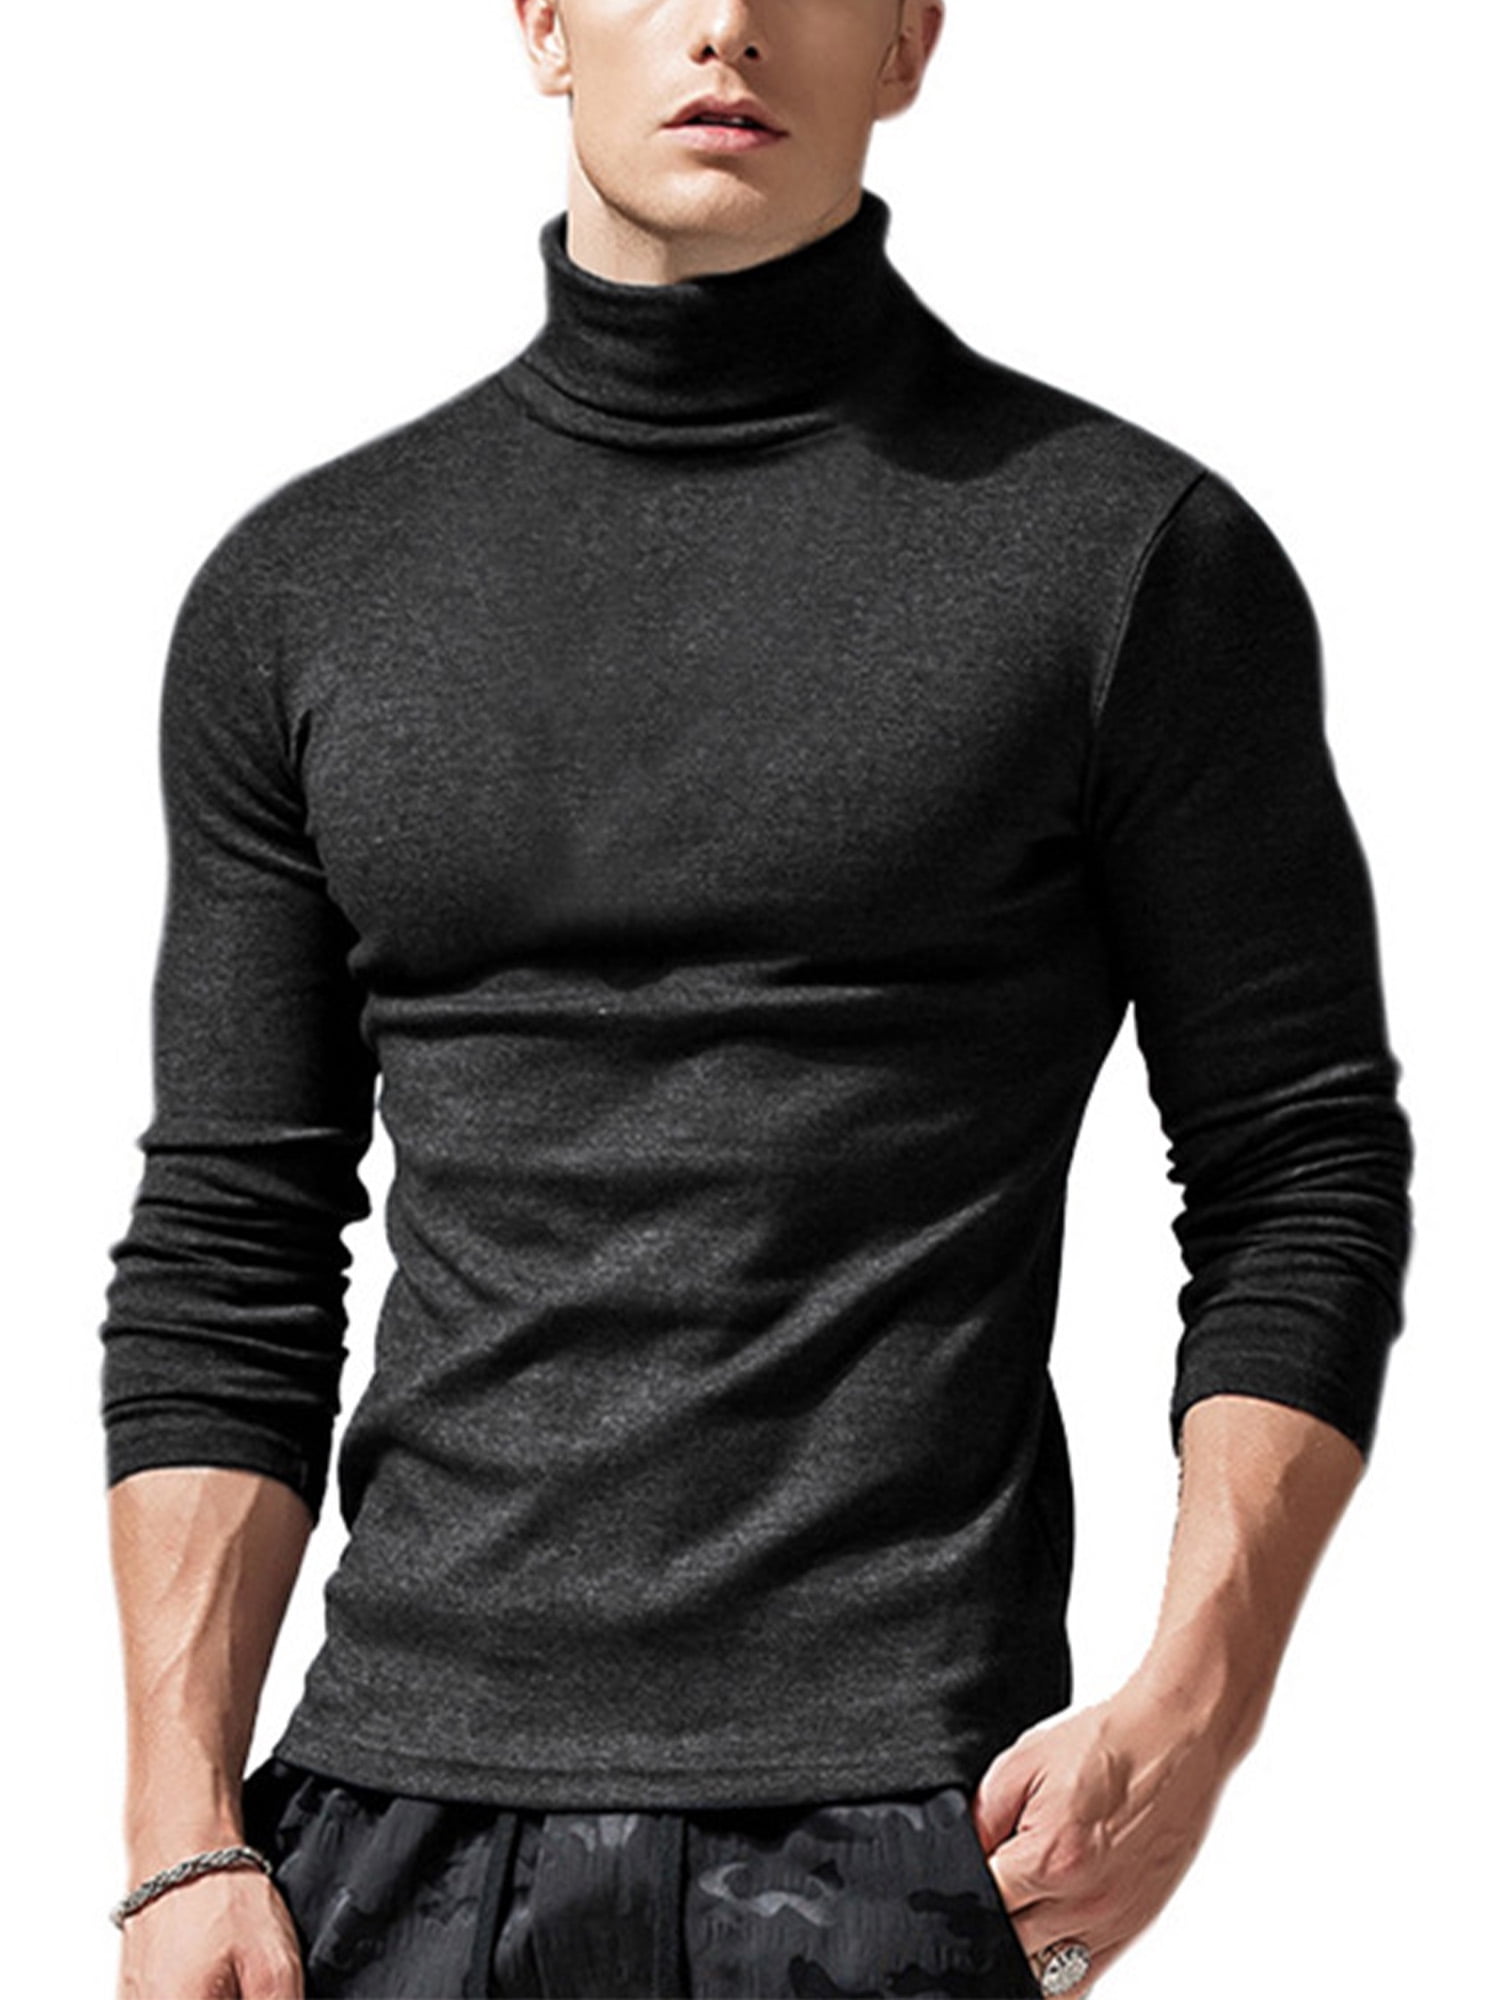 GRMO Men Warm Turtle Neck Long Sleeve Solid Knit Pullover Sweater